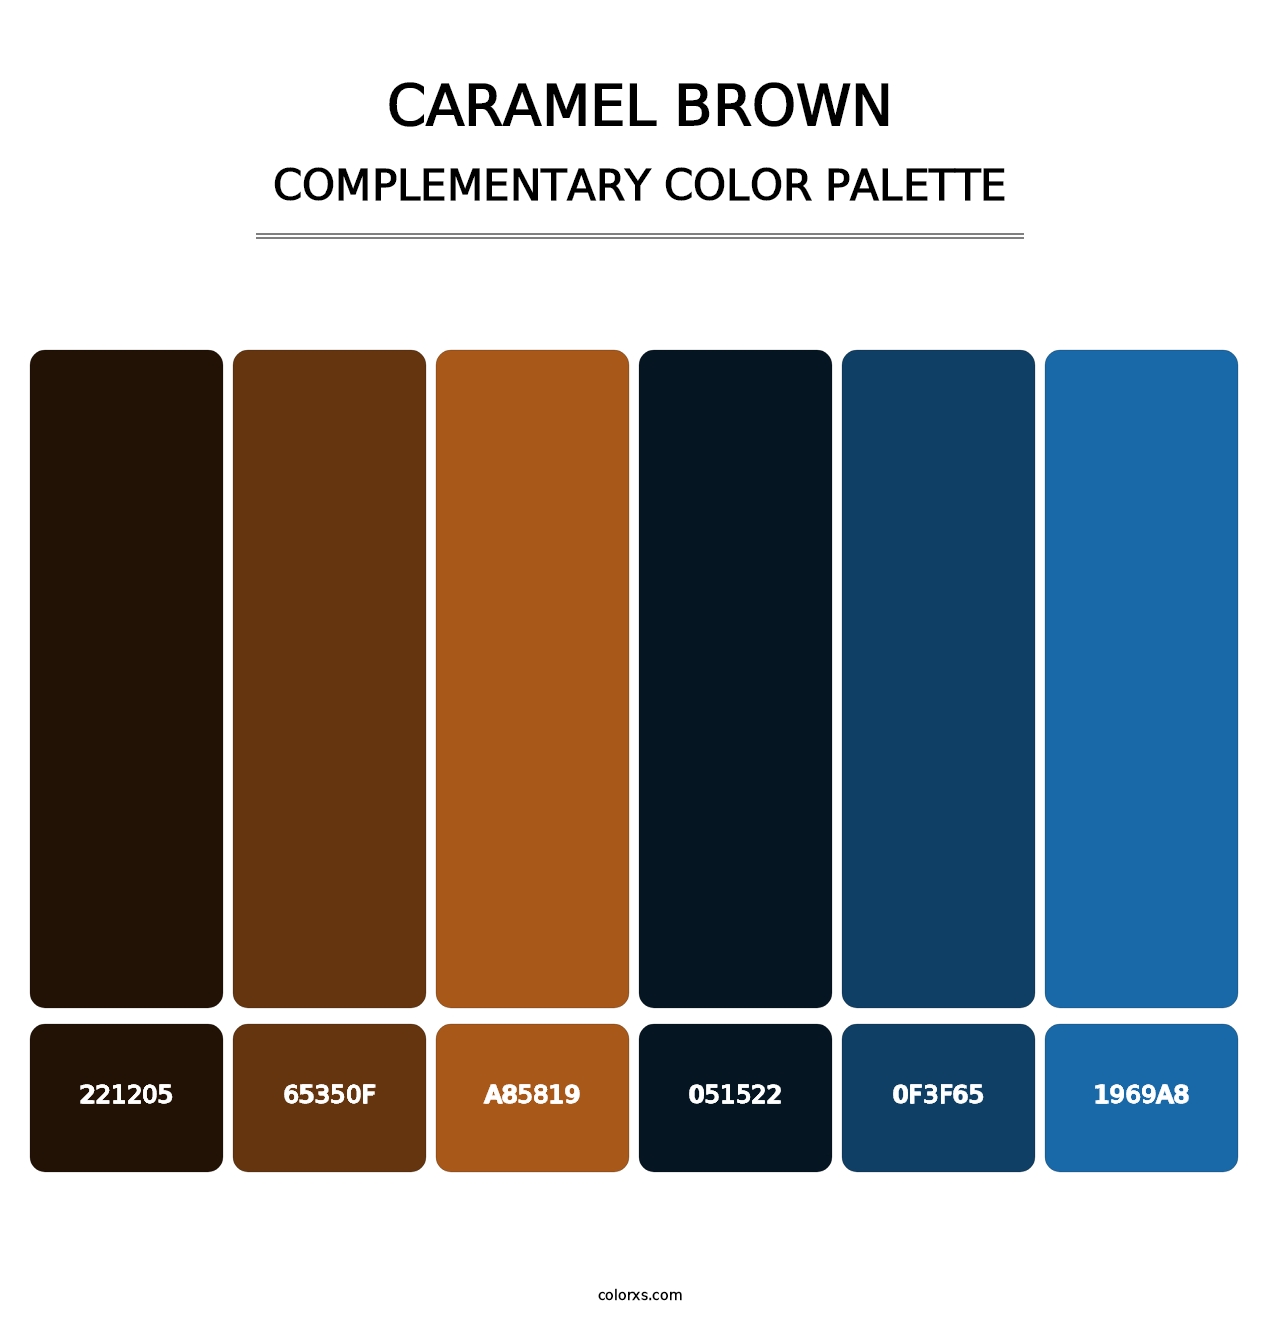 Caramel Brown - Complementary Color Palette